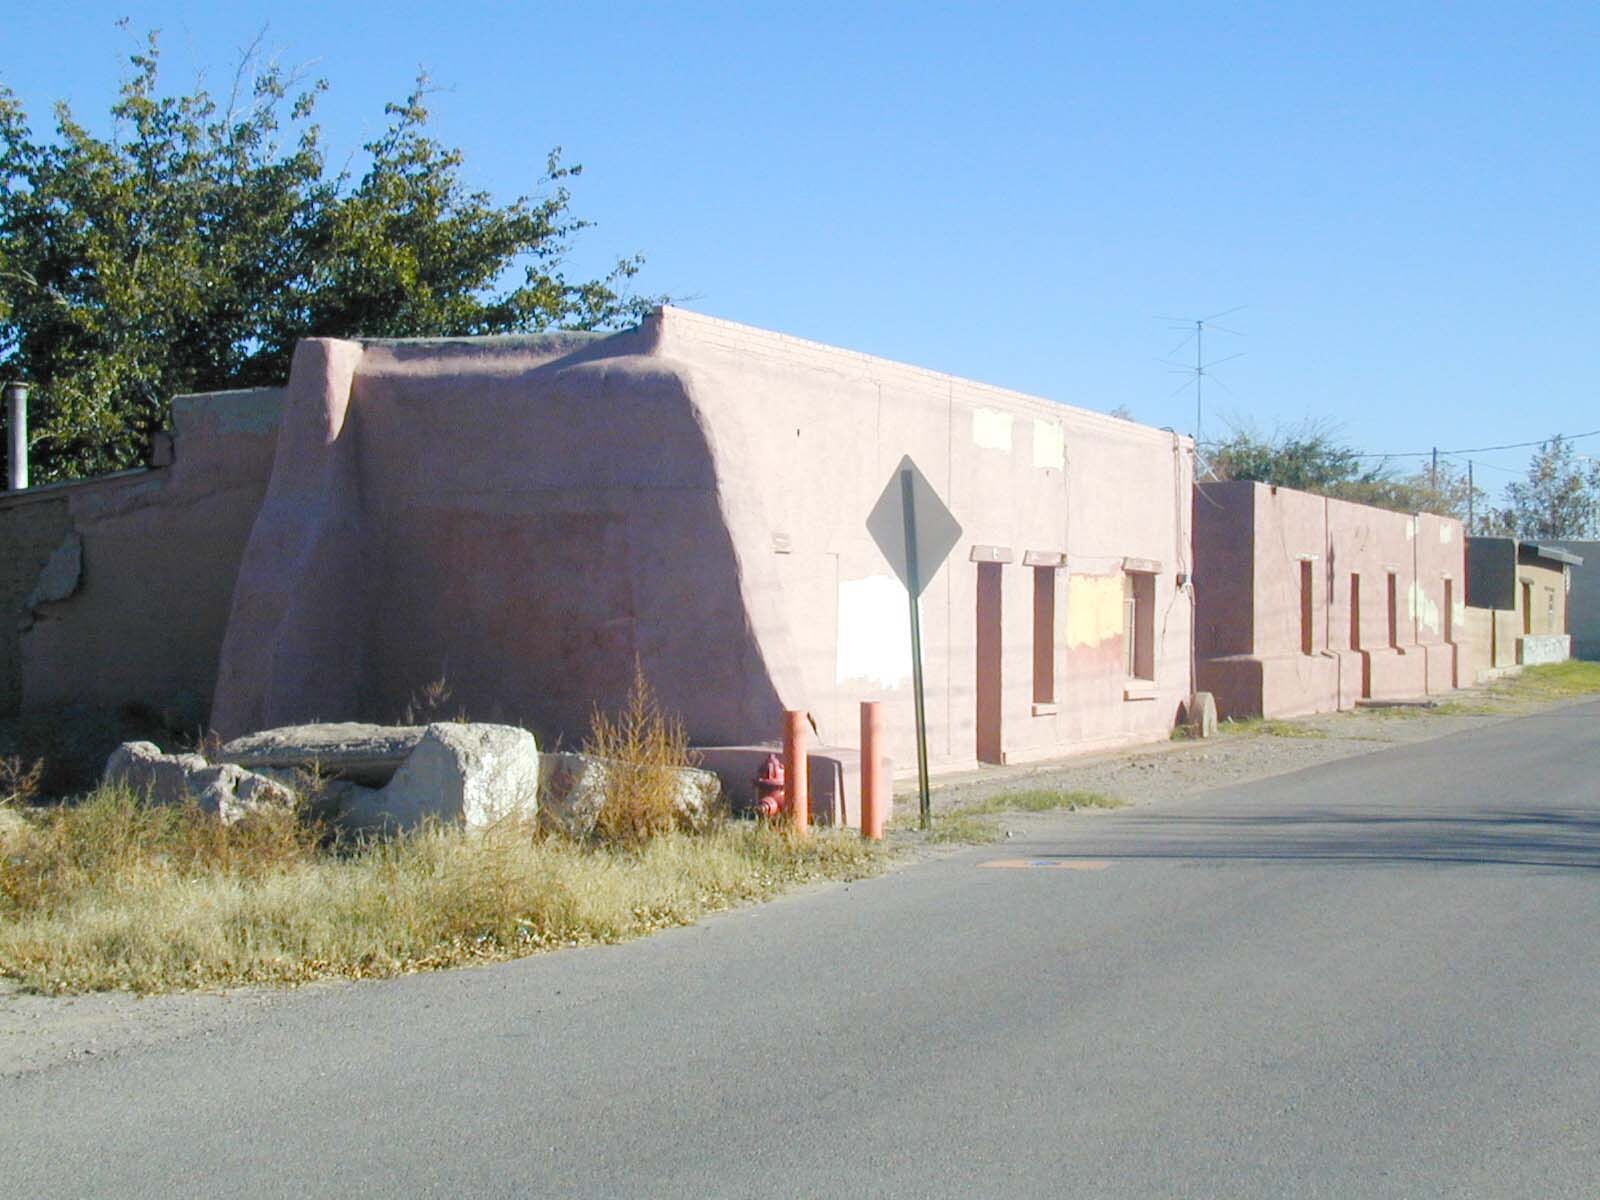 A side street of abandoned properties in Dona Ana, NM